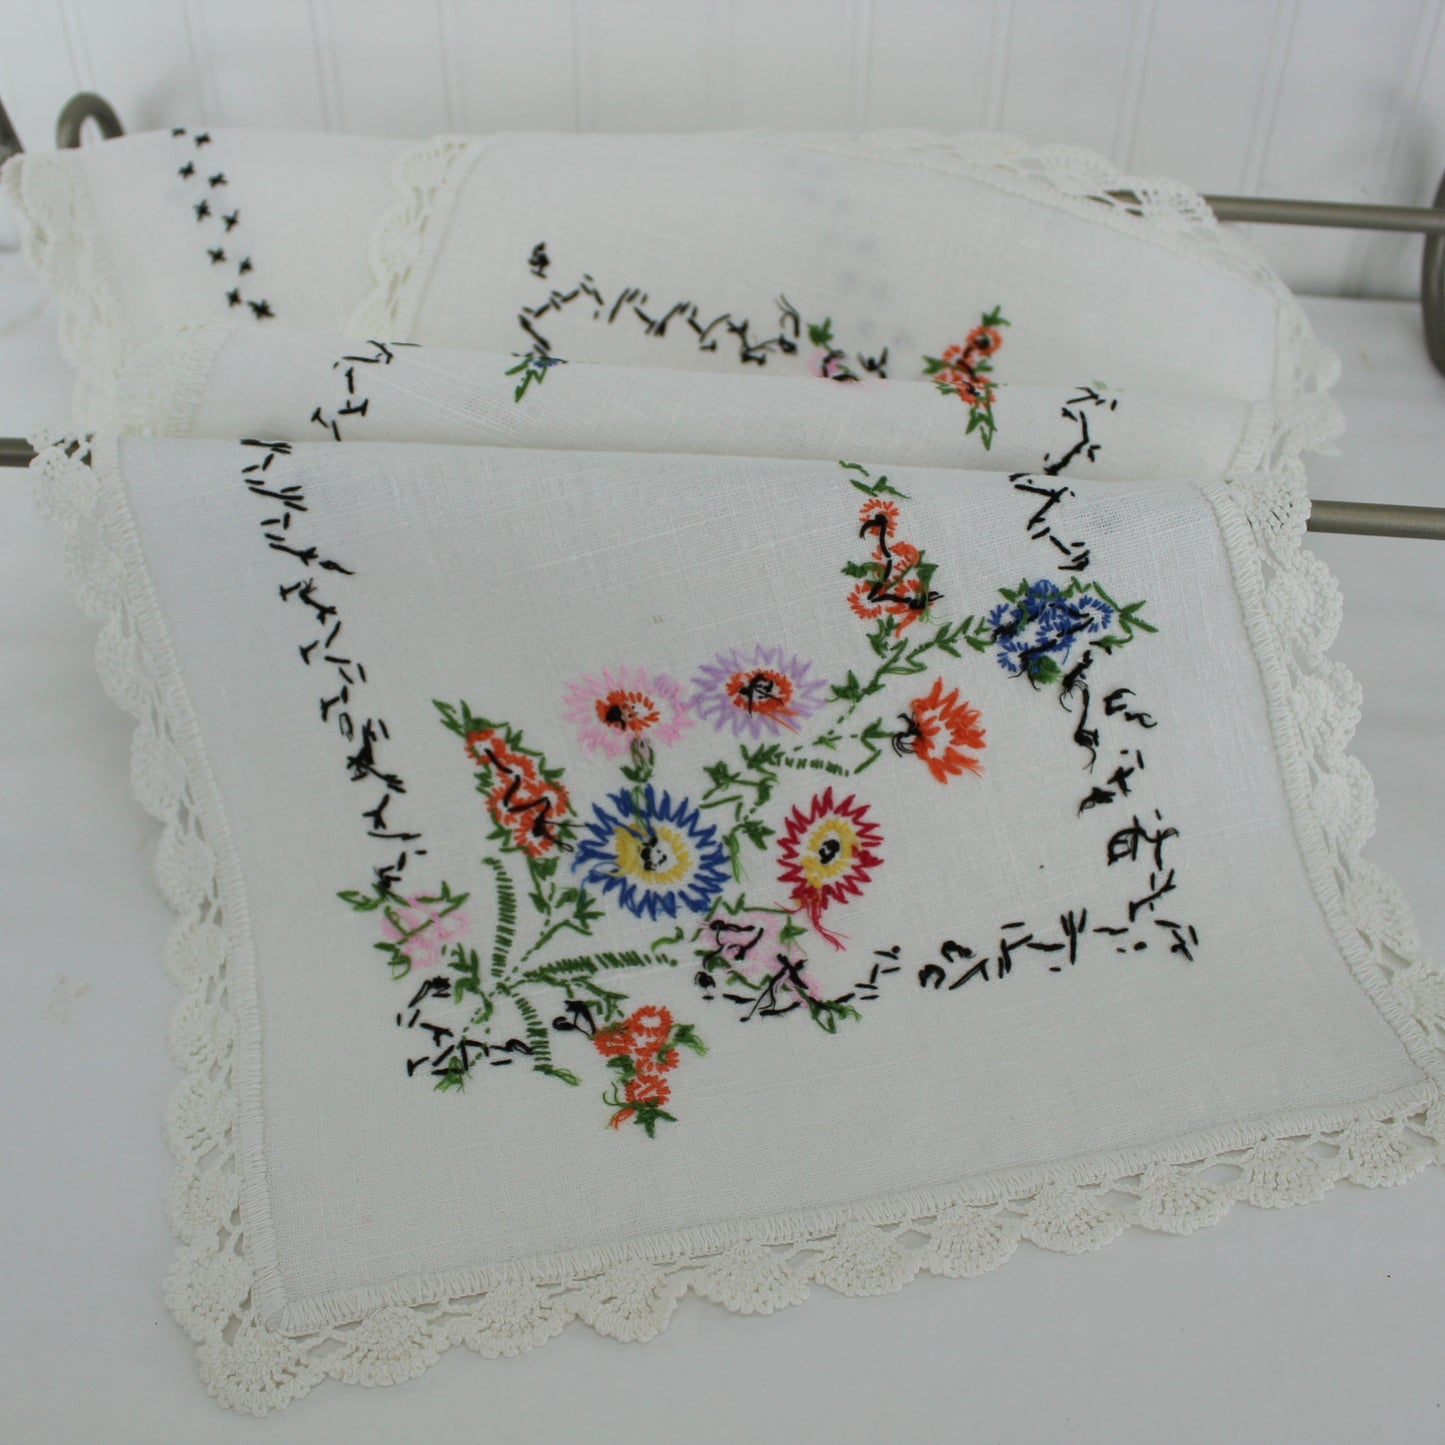 Heavy Linen Table Runner Intricately Embroidered Mid Century 39" X 12" reverse side of runner showiing hand stitching